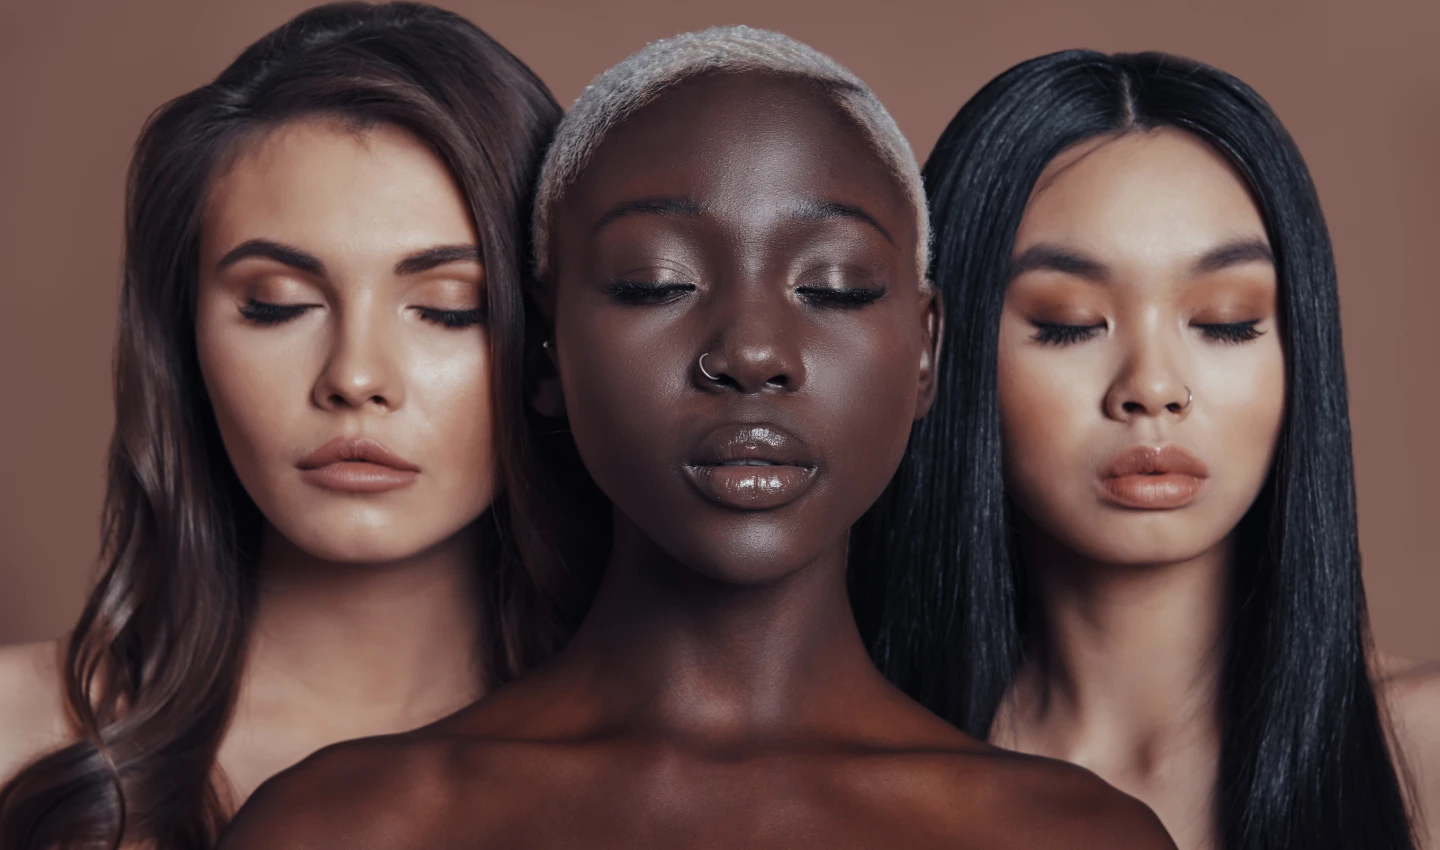 Three women of different skin tones representing various ethnicities and nationalities, standing in front of the camera with eyes closed, embracing diversity and inclusivity in beauty with global face shades designed to match every skin tone and complexion.